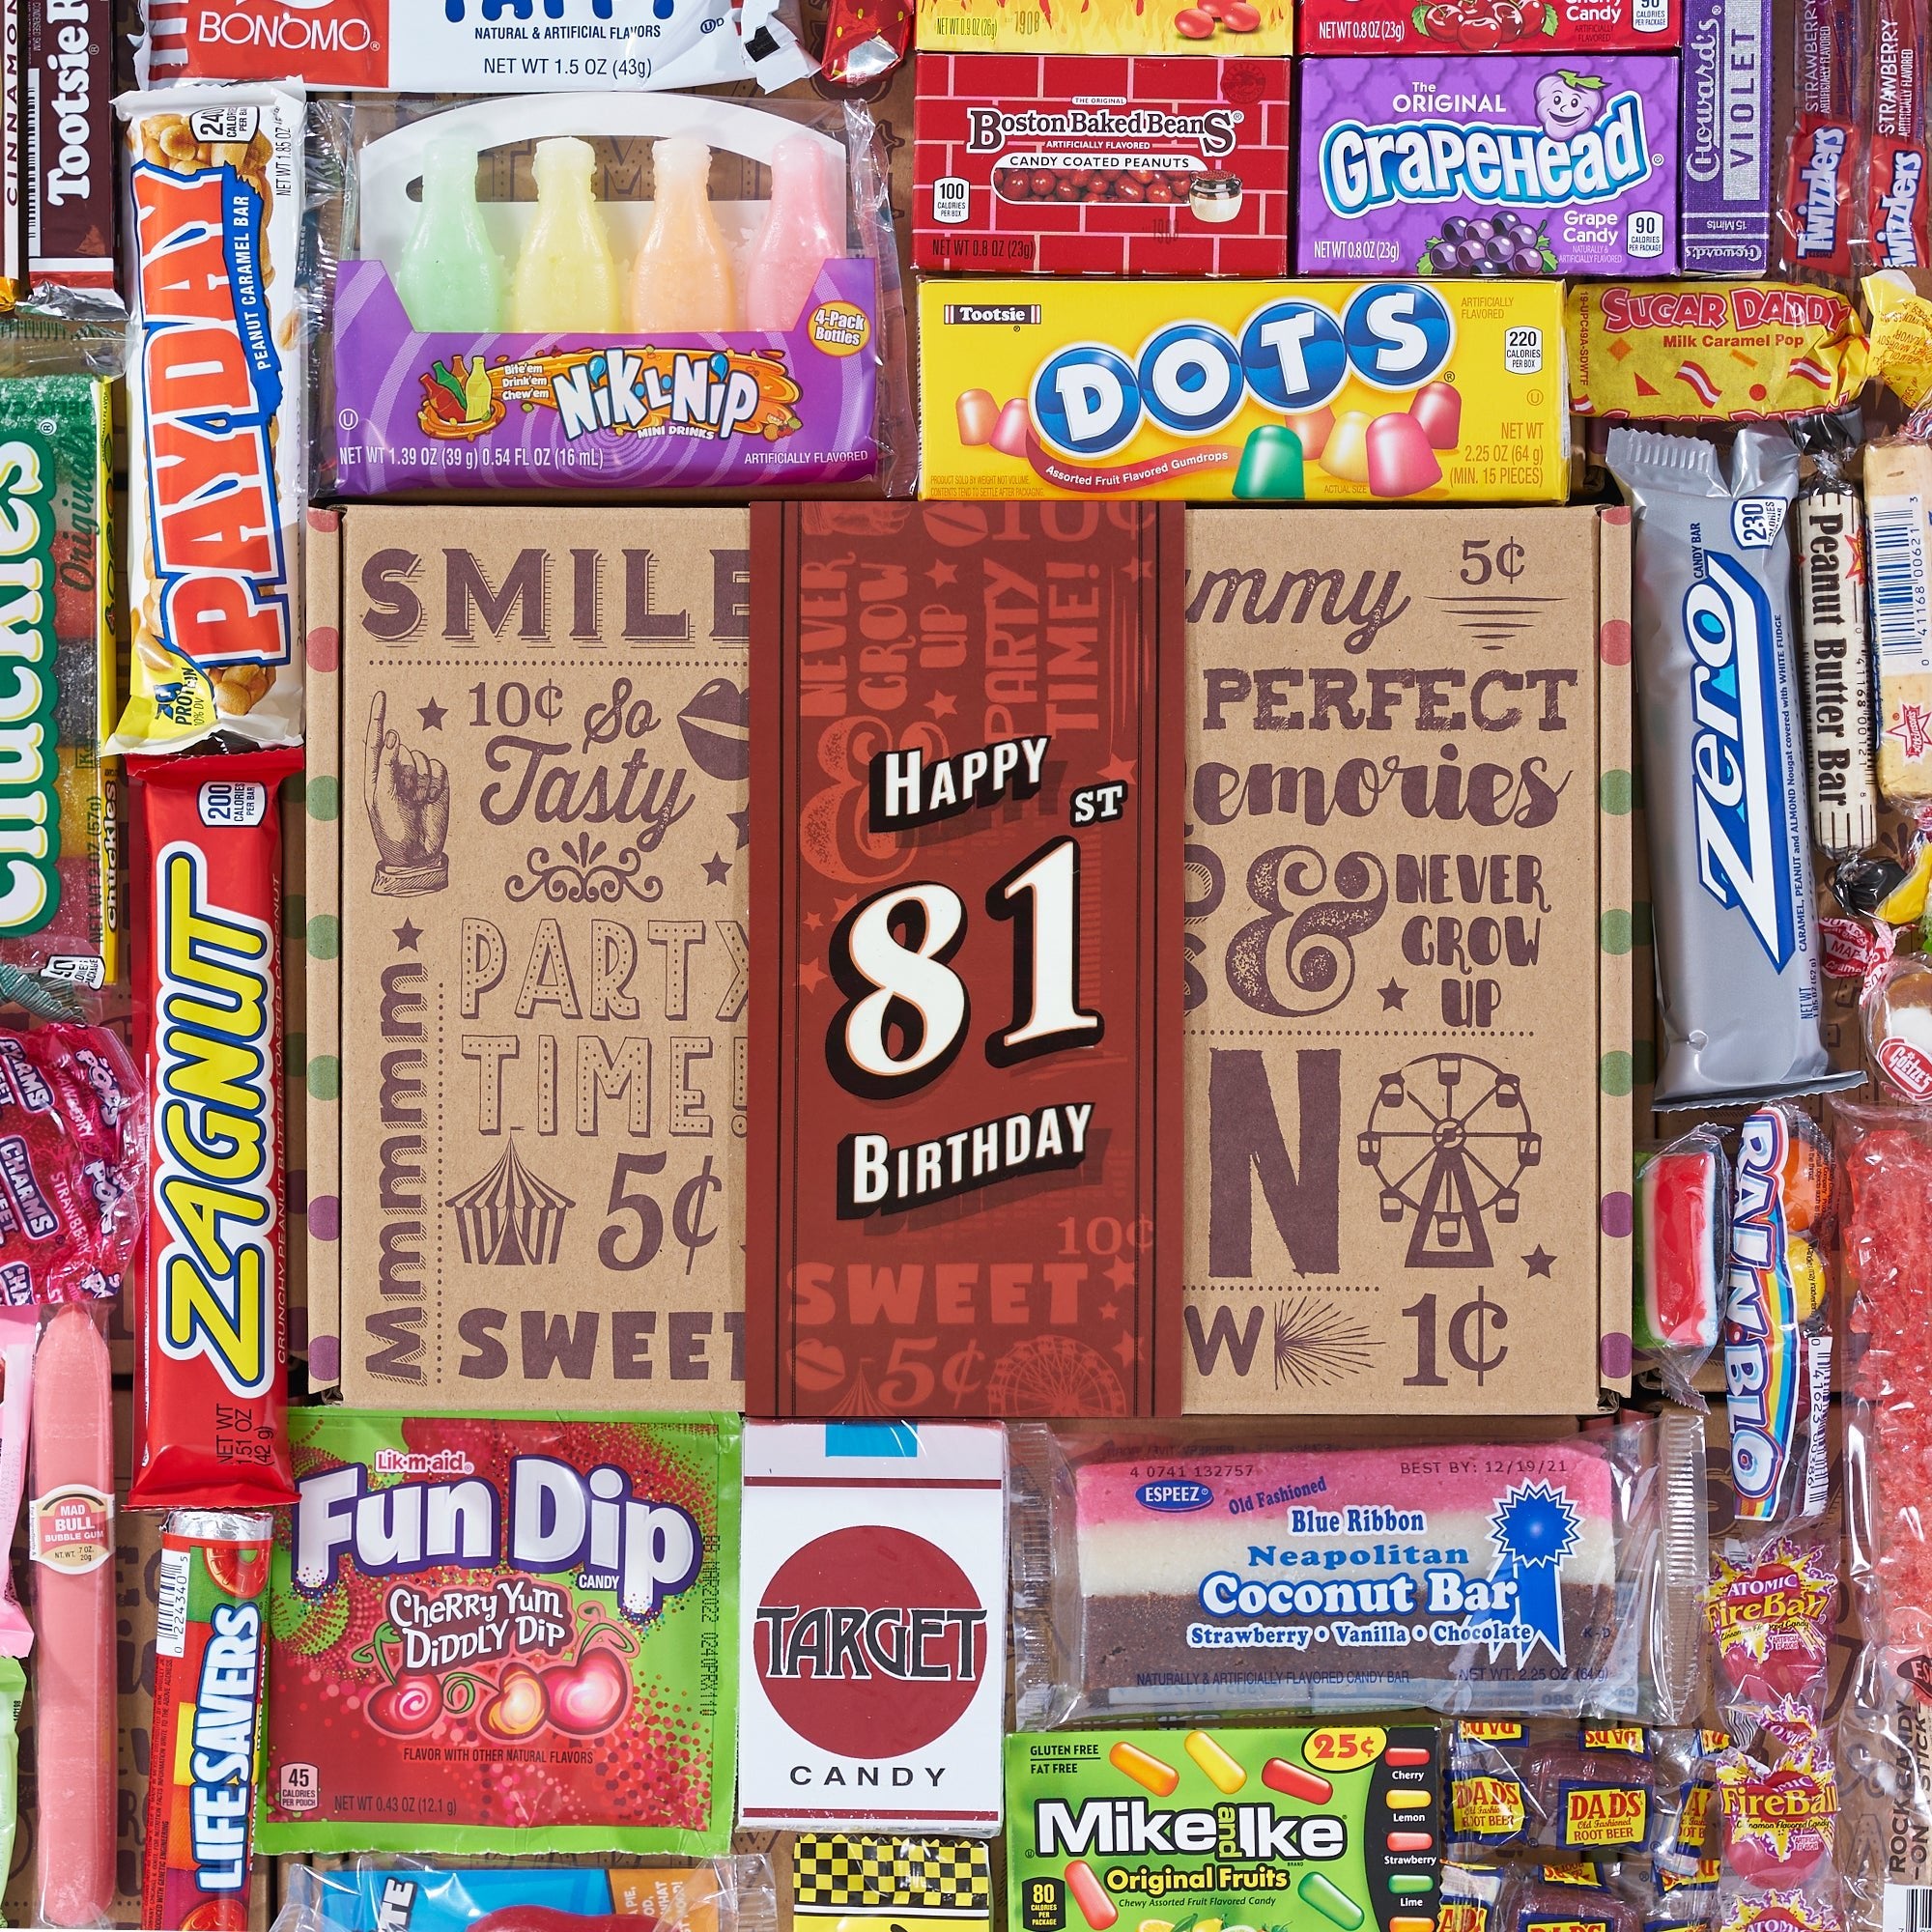 81st Birthday Retro Candy Gift - Vintage Candy Co.